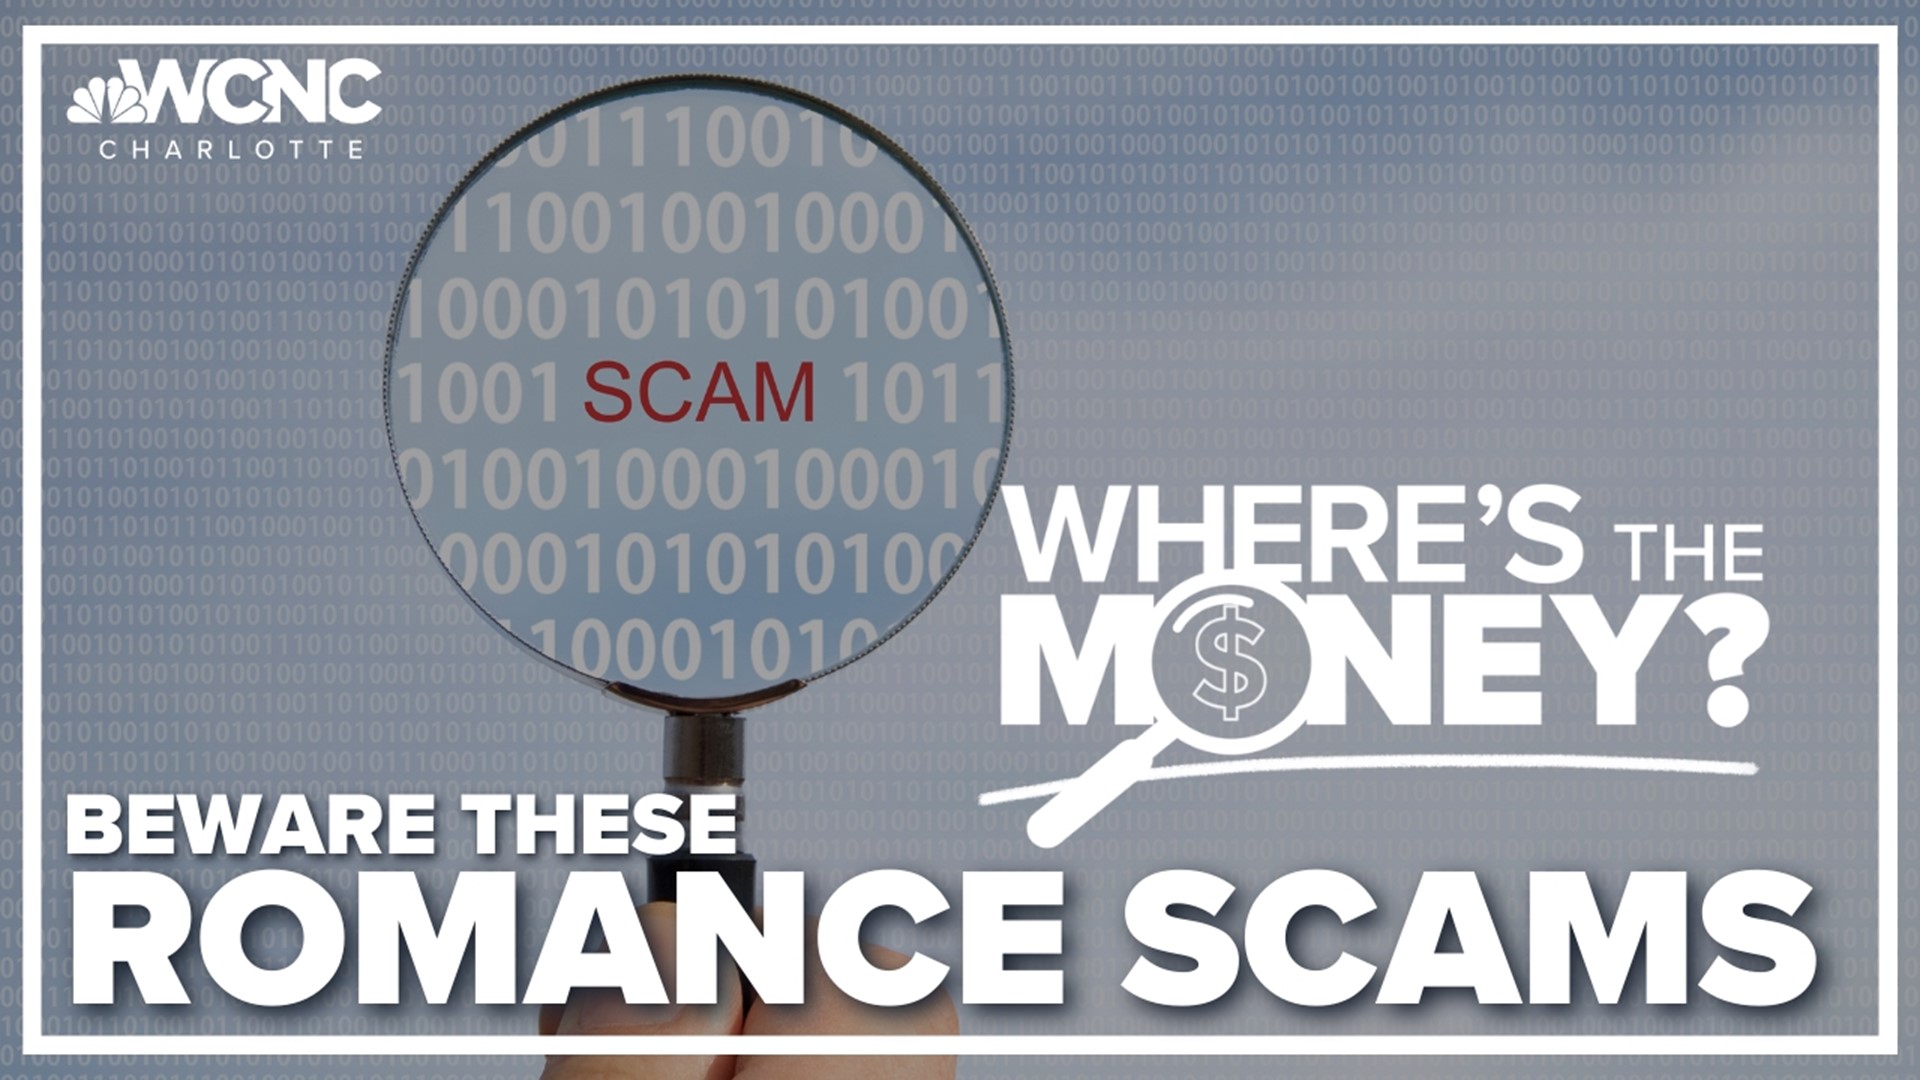 Charlotte is at the center of a romance scam that took $1.5 million dollars.